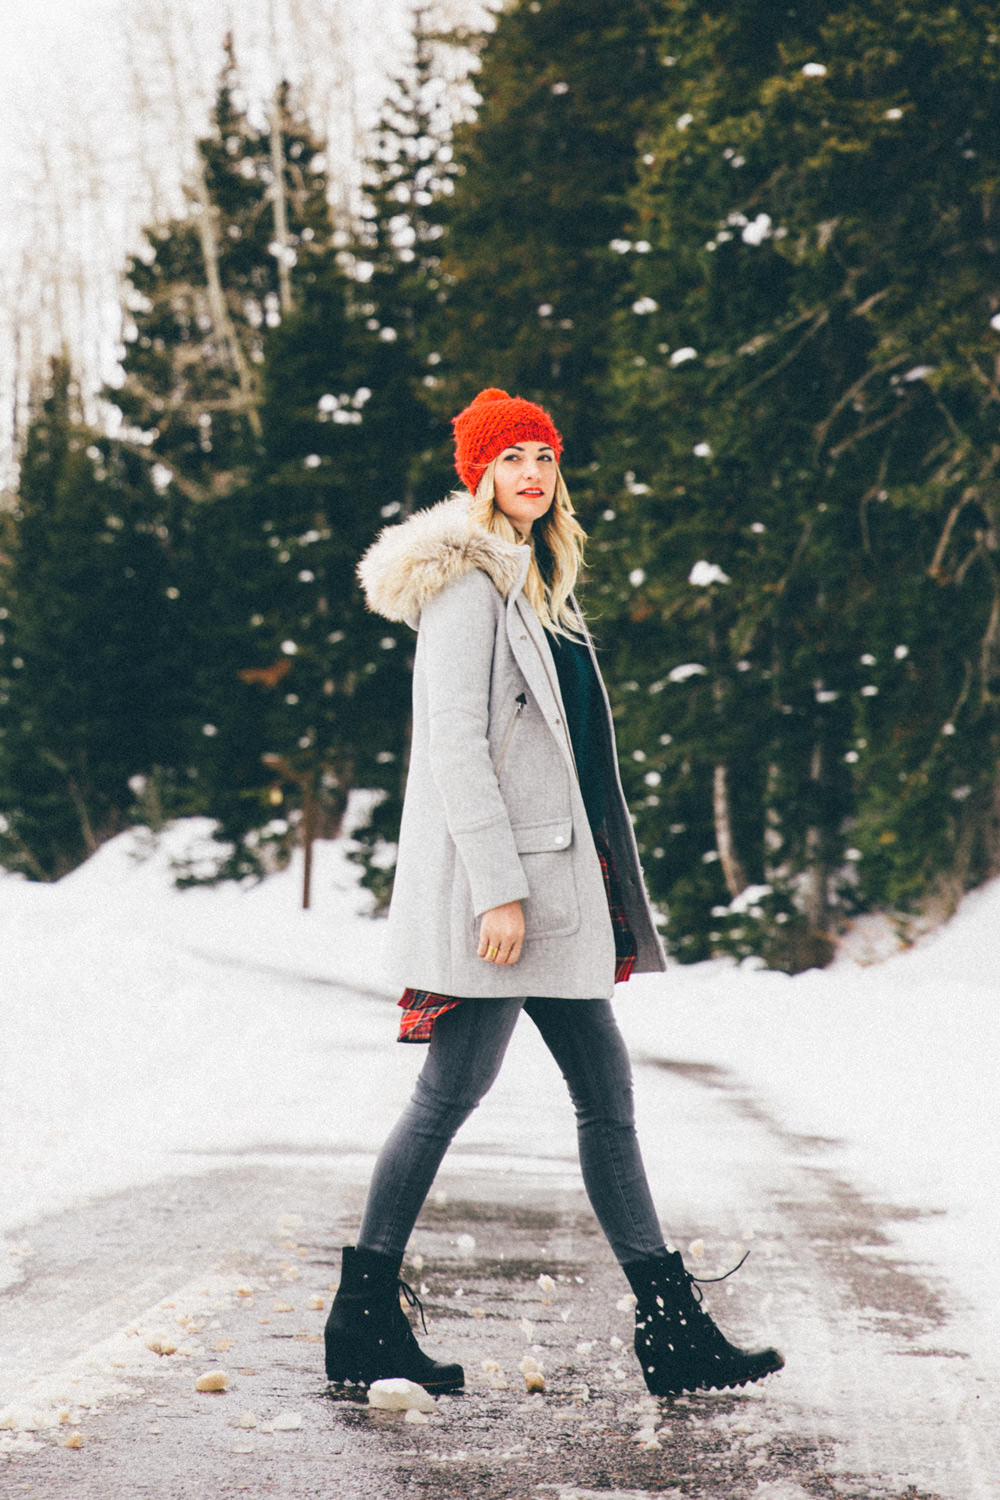 Dash of Darling wears a winter outfit in the snow while visiting home in Park City, Utah